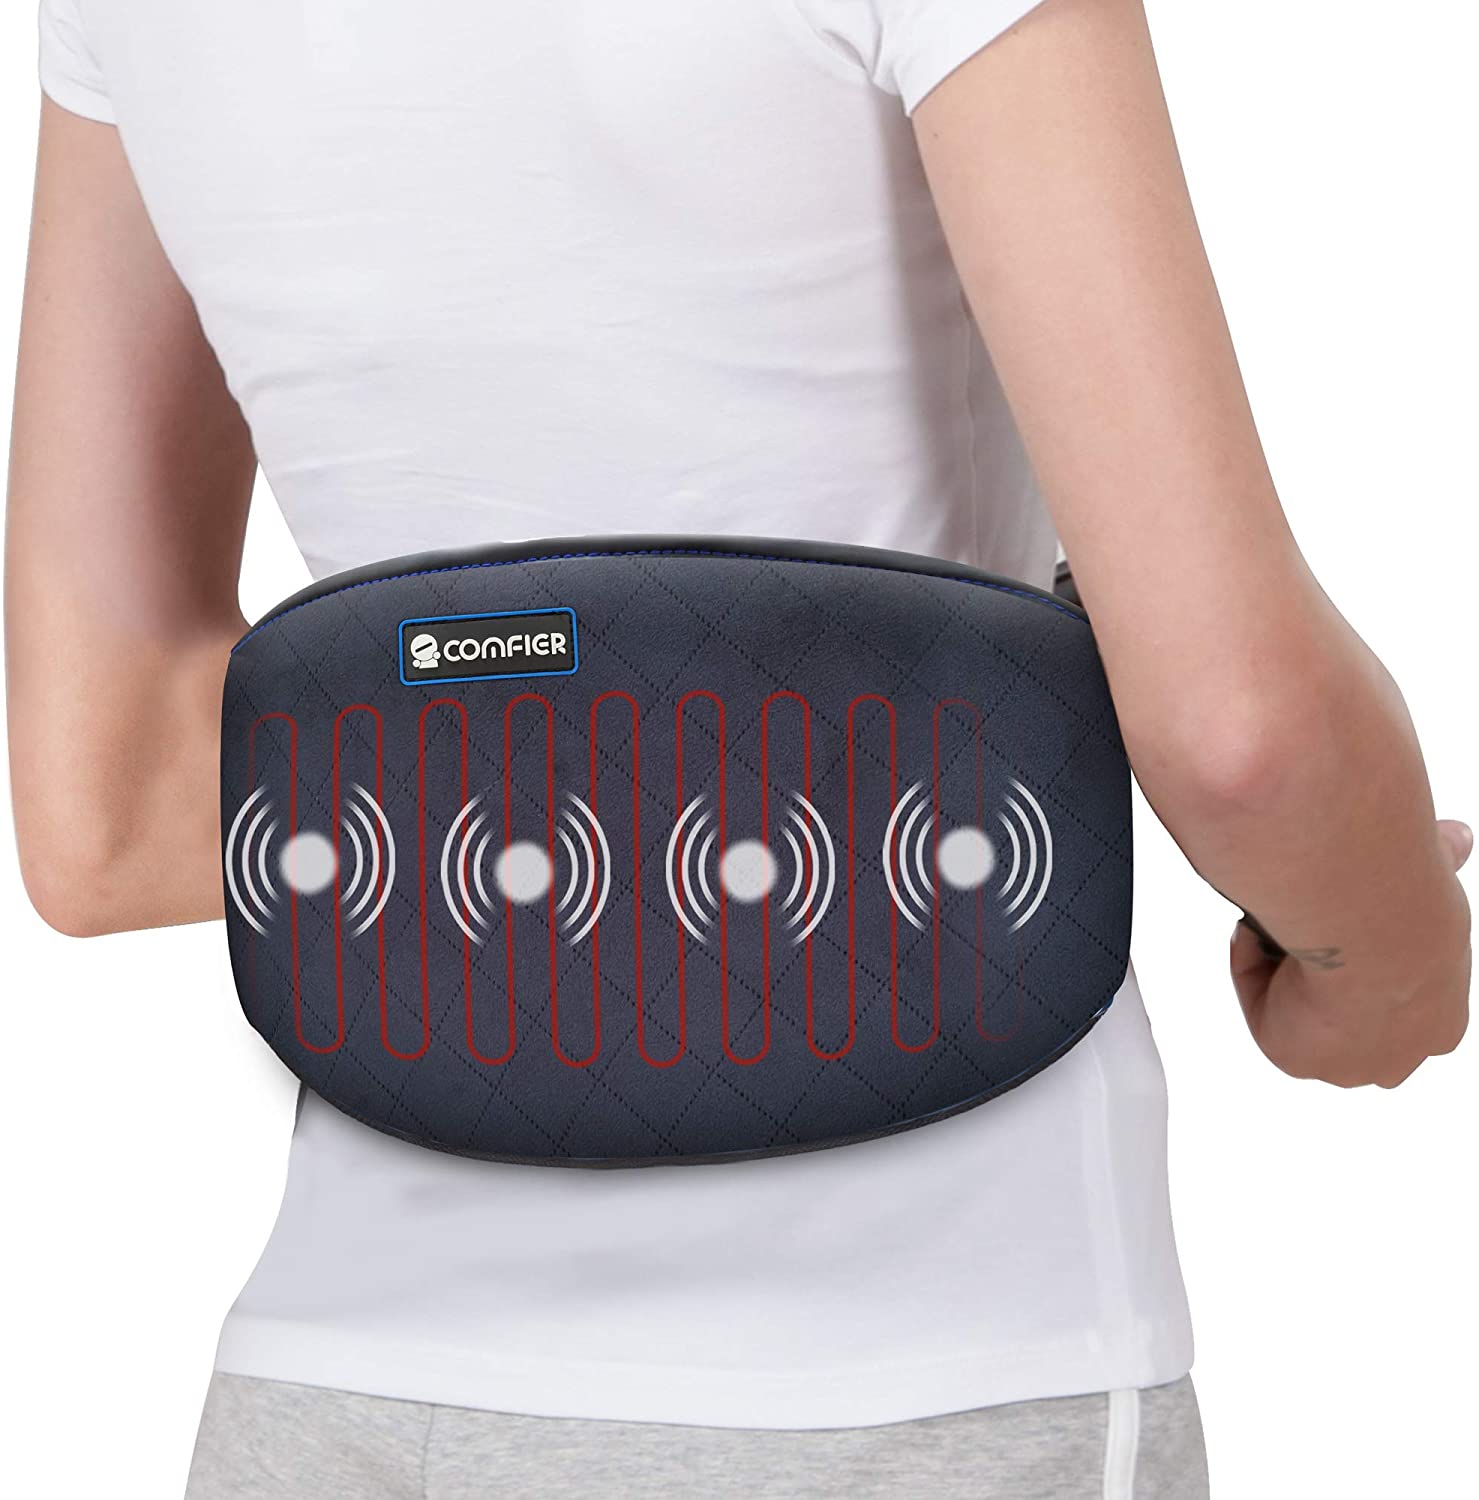 Review of Comfier Heating Pad for Back Pain - Heat Belly Wrap Belt with Massager